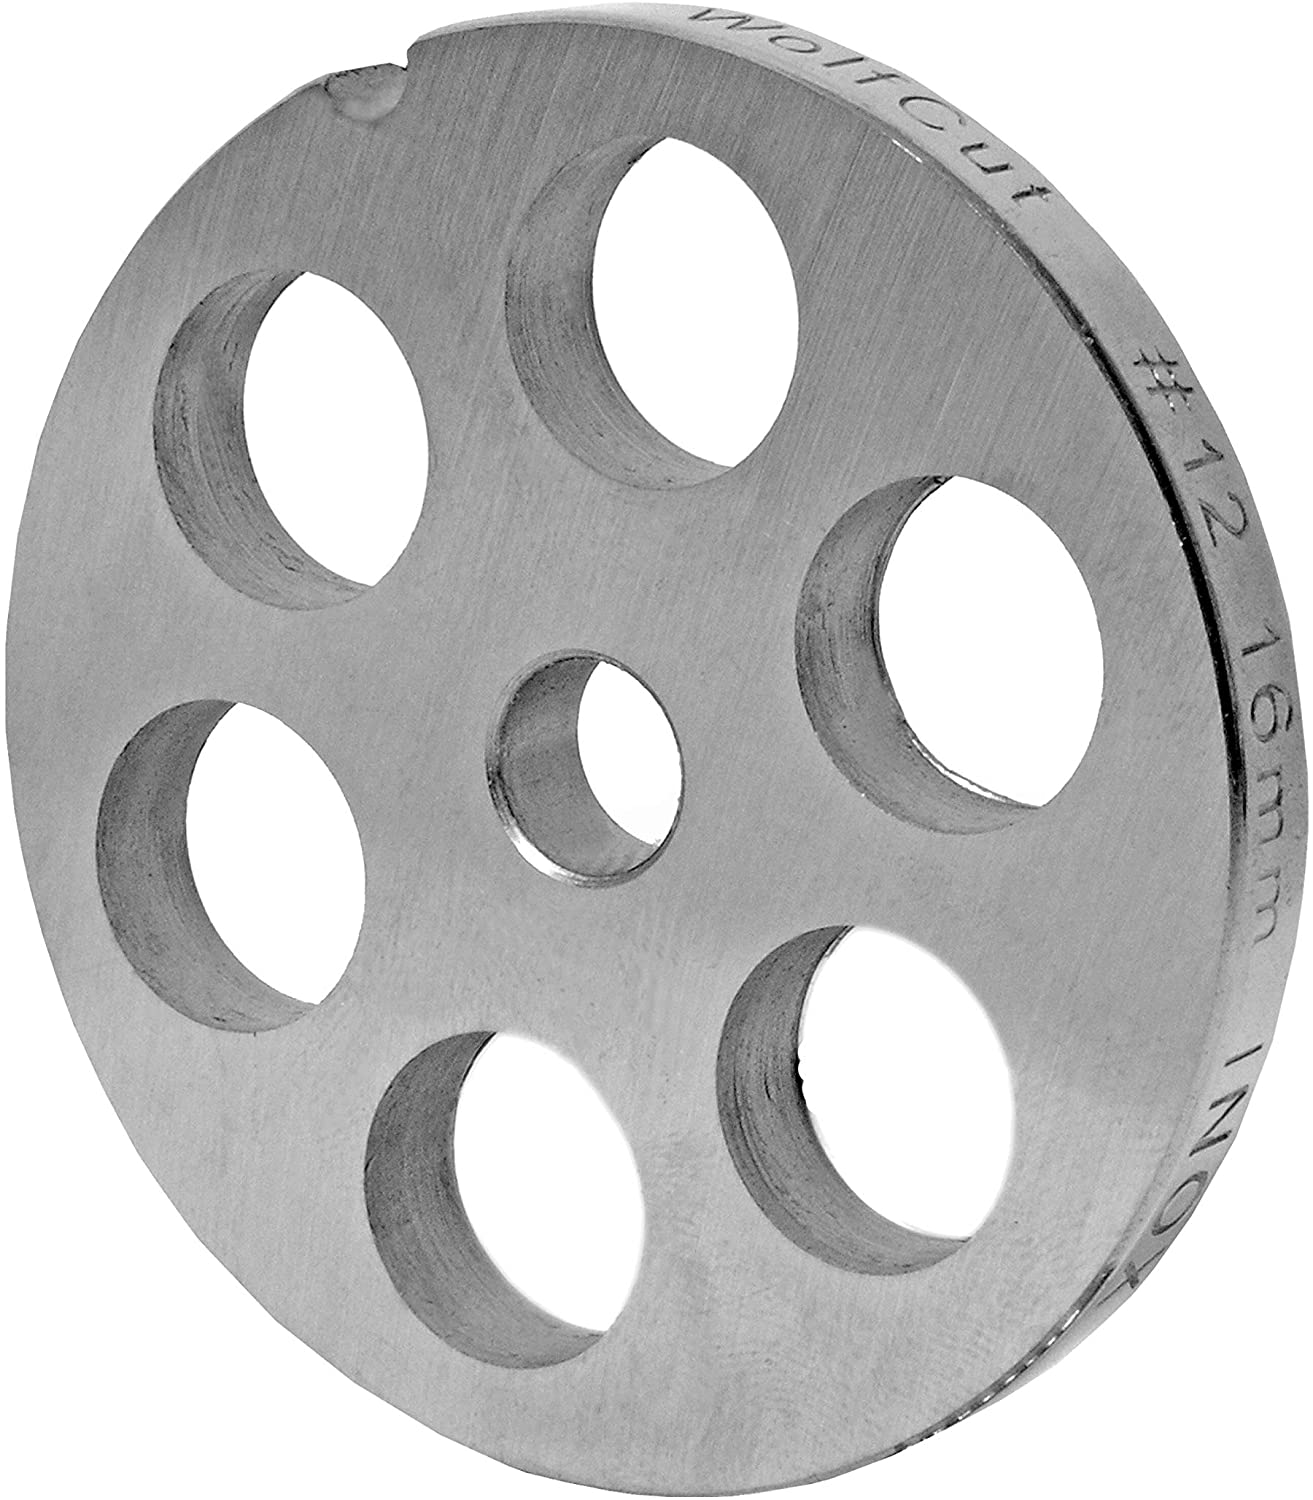 WolfCut Meat Grinder Discs Suitable For Reber Sizes 12 (16.0 Mm)